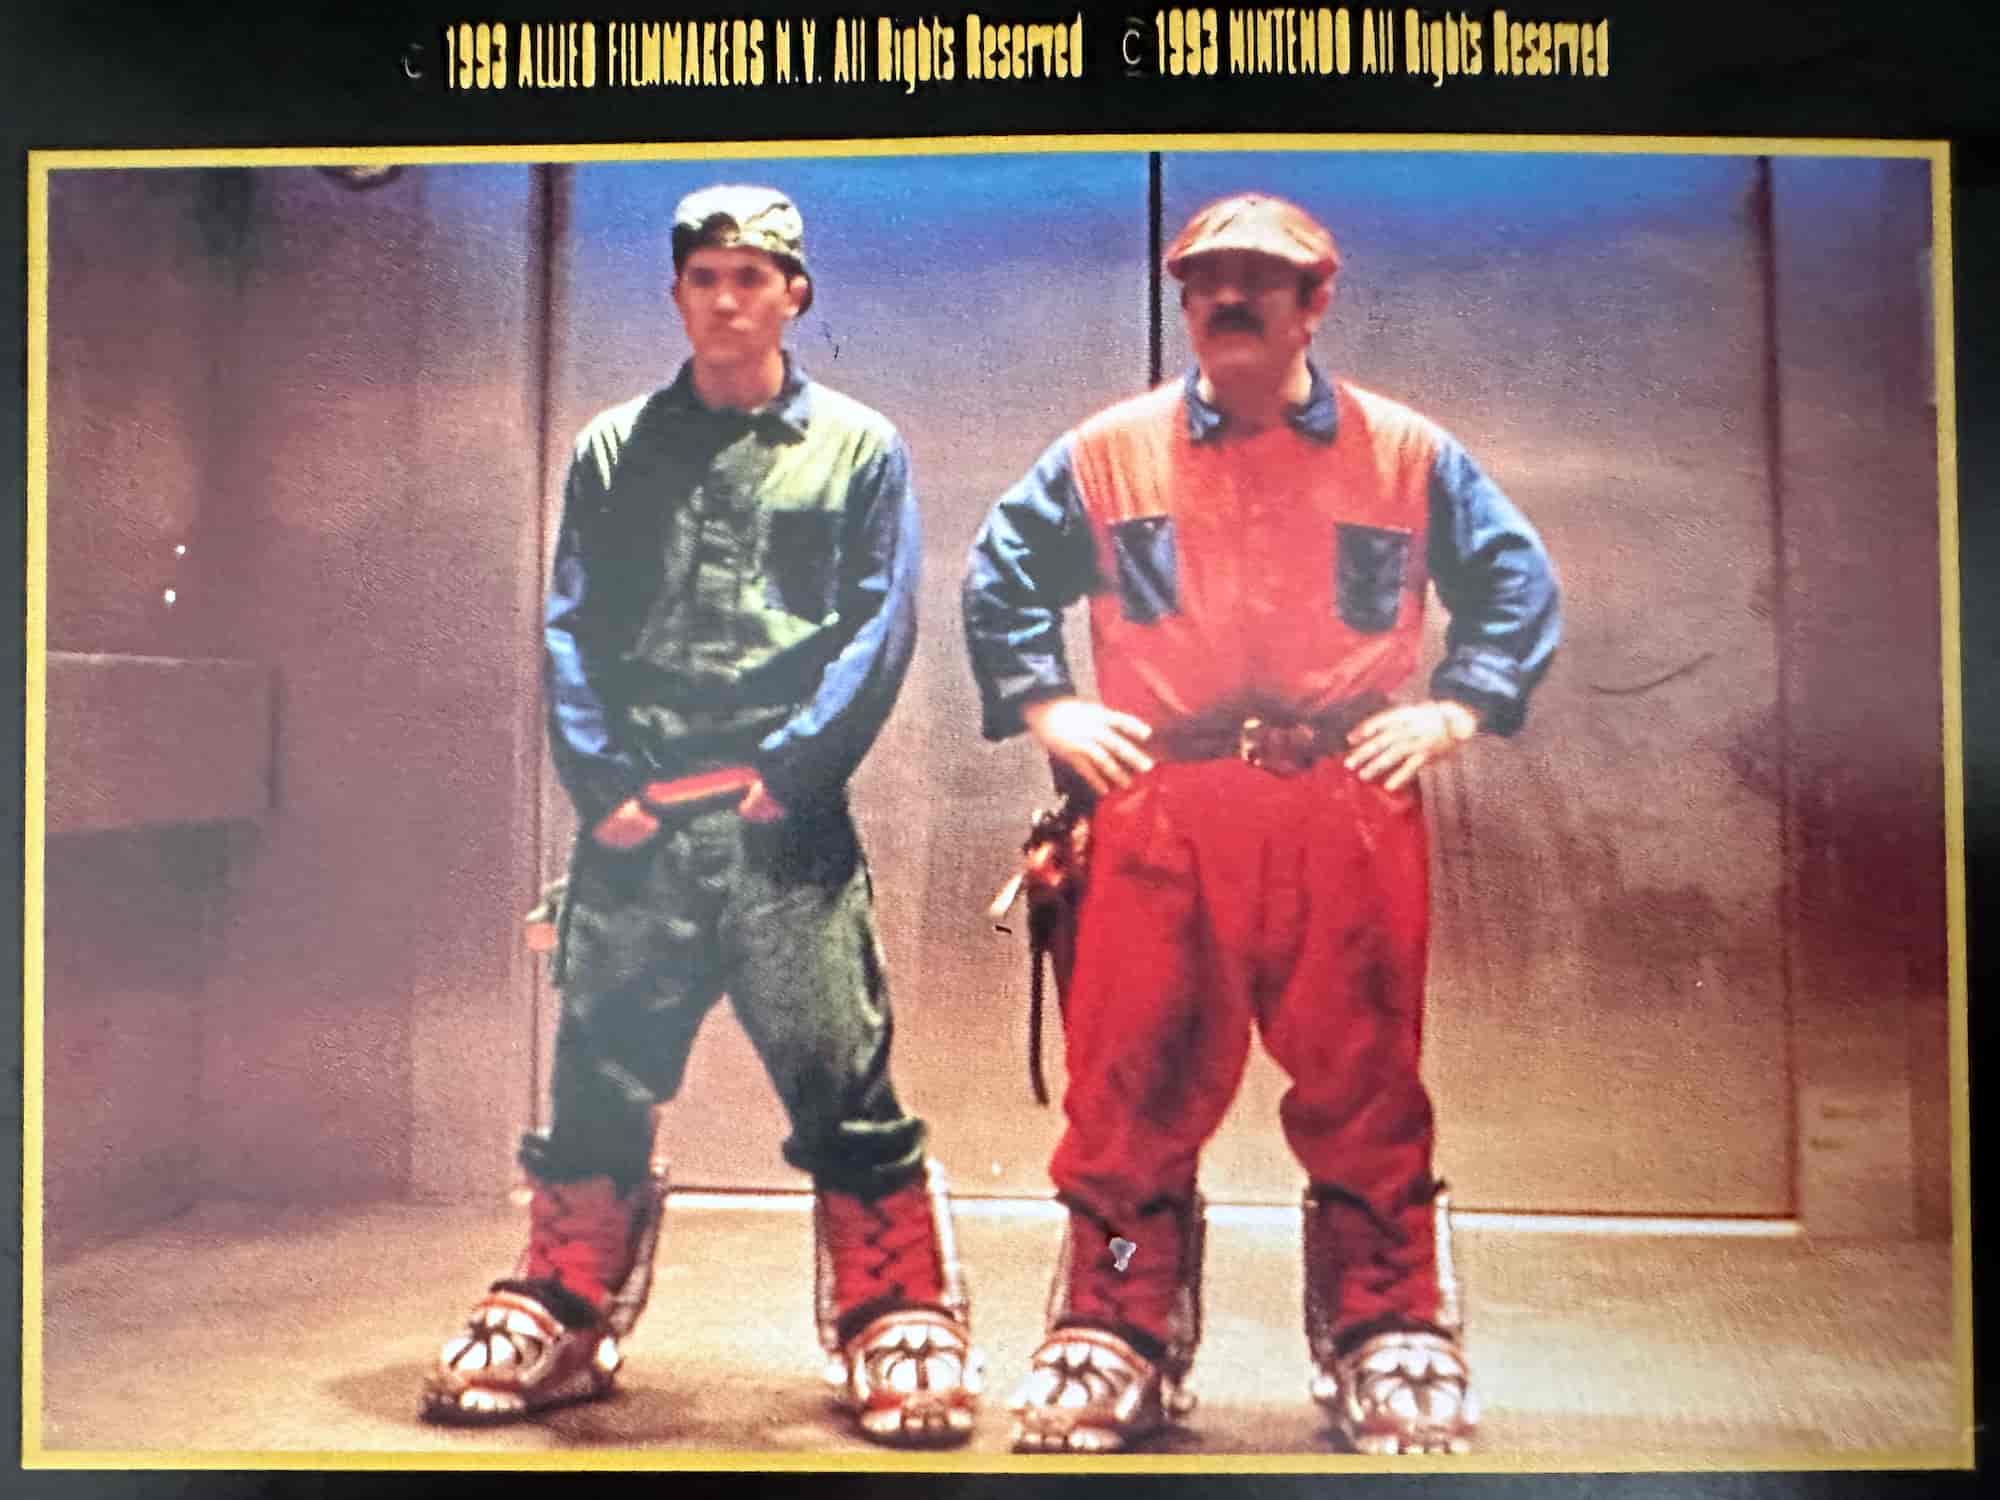 Mario & Luigi wearing their iconic red and green outfits, with Thwomp Stompers on their feet.